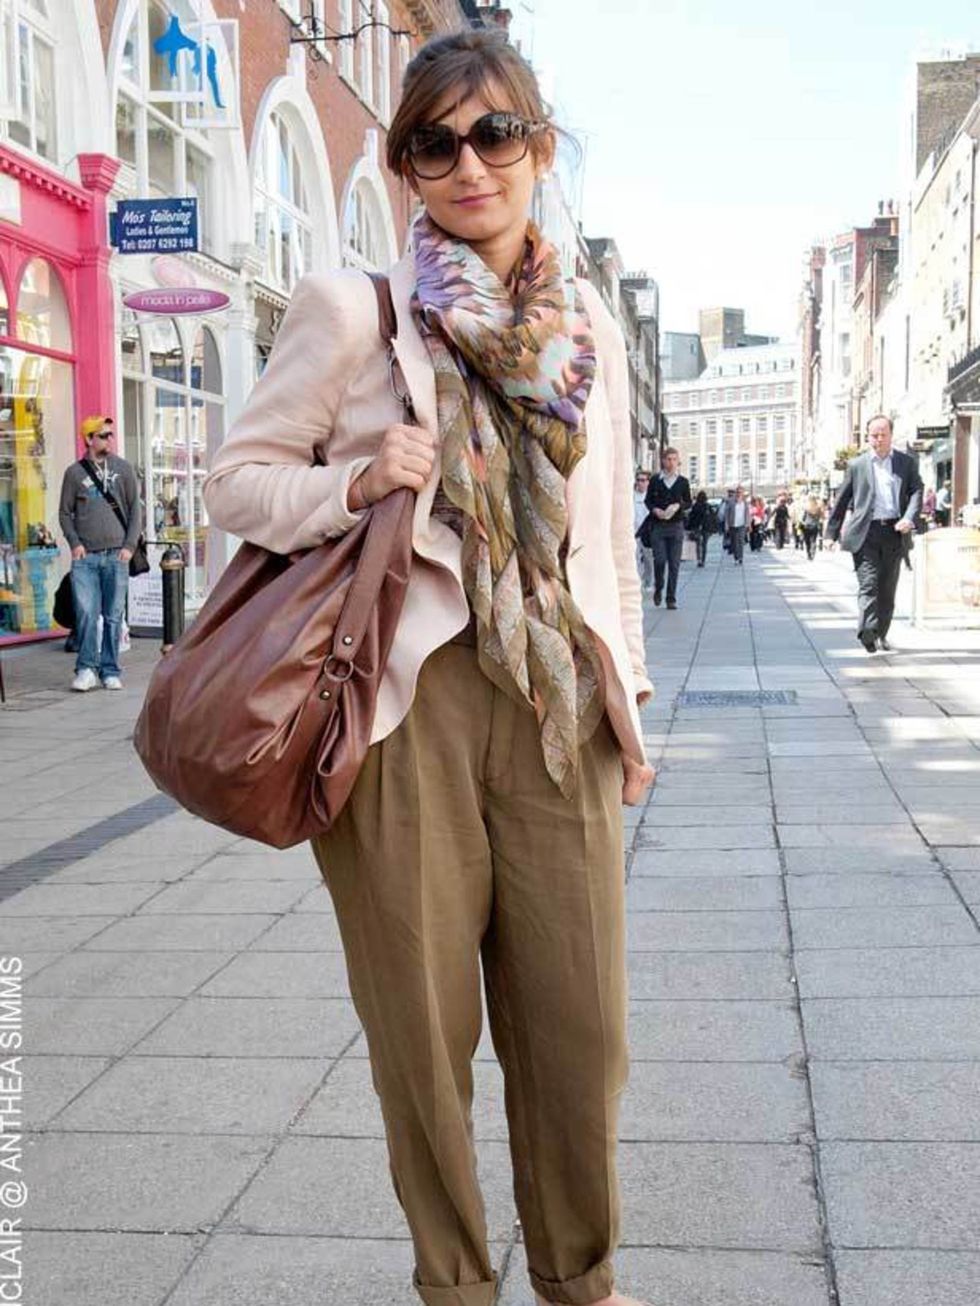 <p>Teona, 22, Mens Tailor. Zara jacket, trousers, belt and bag, H&amp;M top, Topshop shoes, Gucci sunglasses. </p>